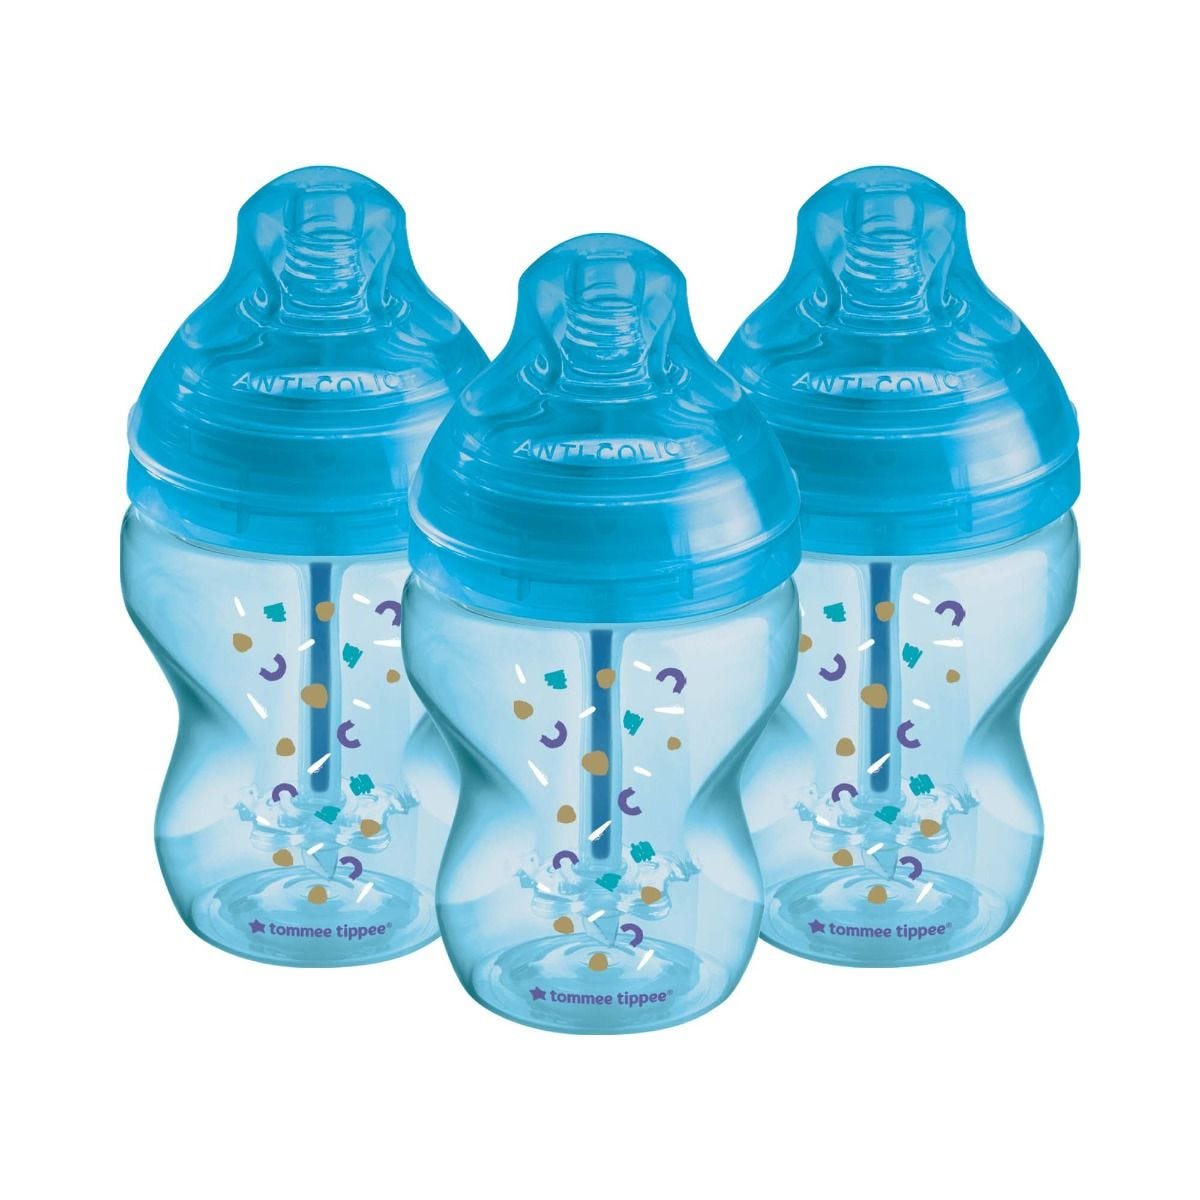 260 ml 3 count Tommee Tippee Advanced Anti-Colic Bottles 